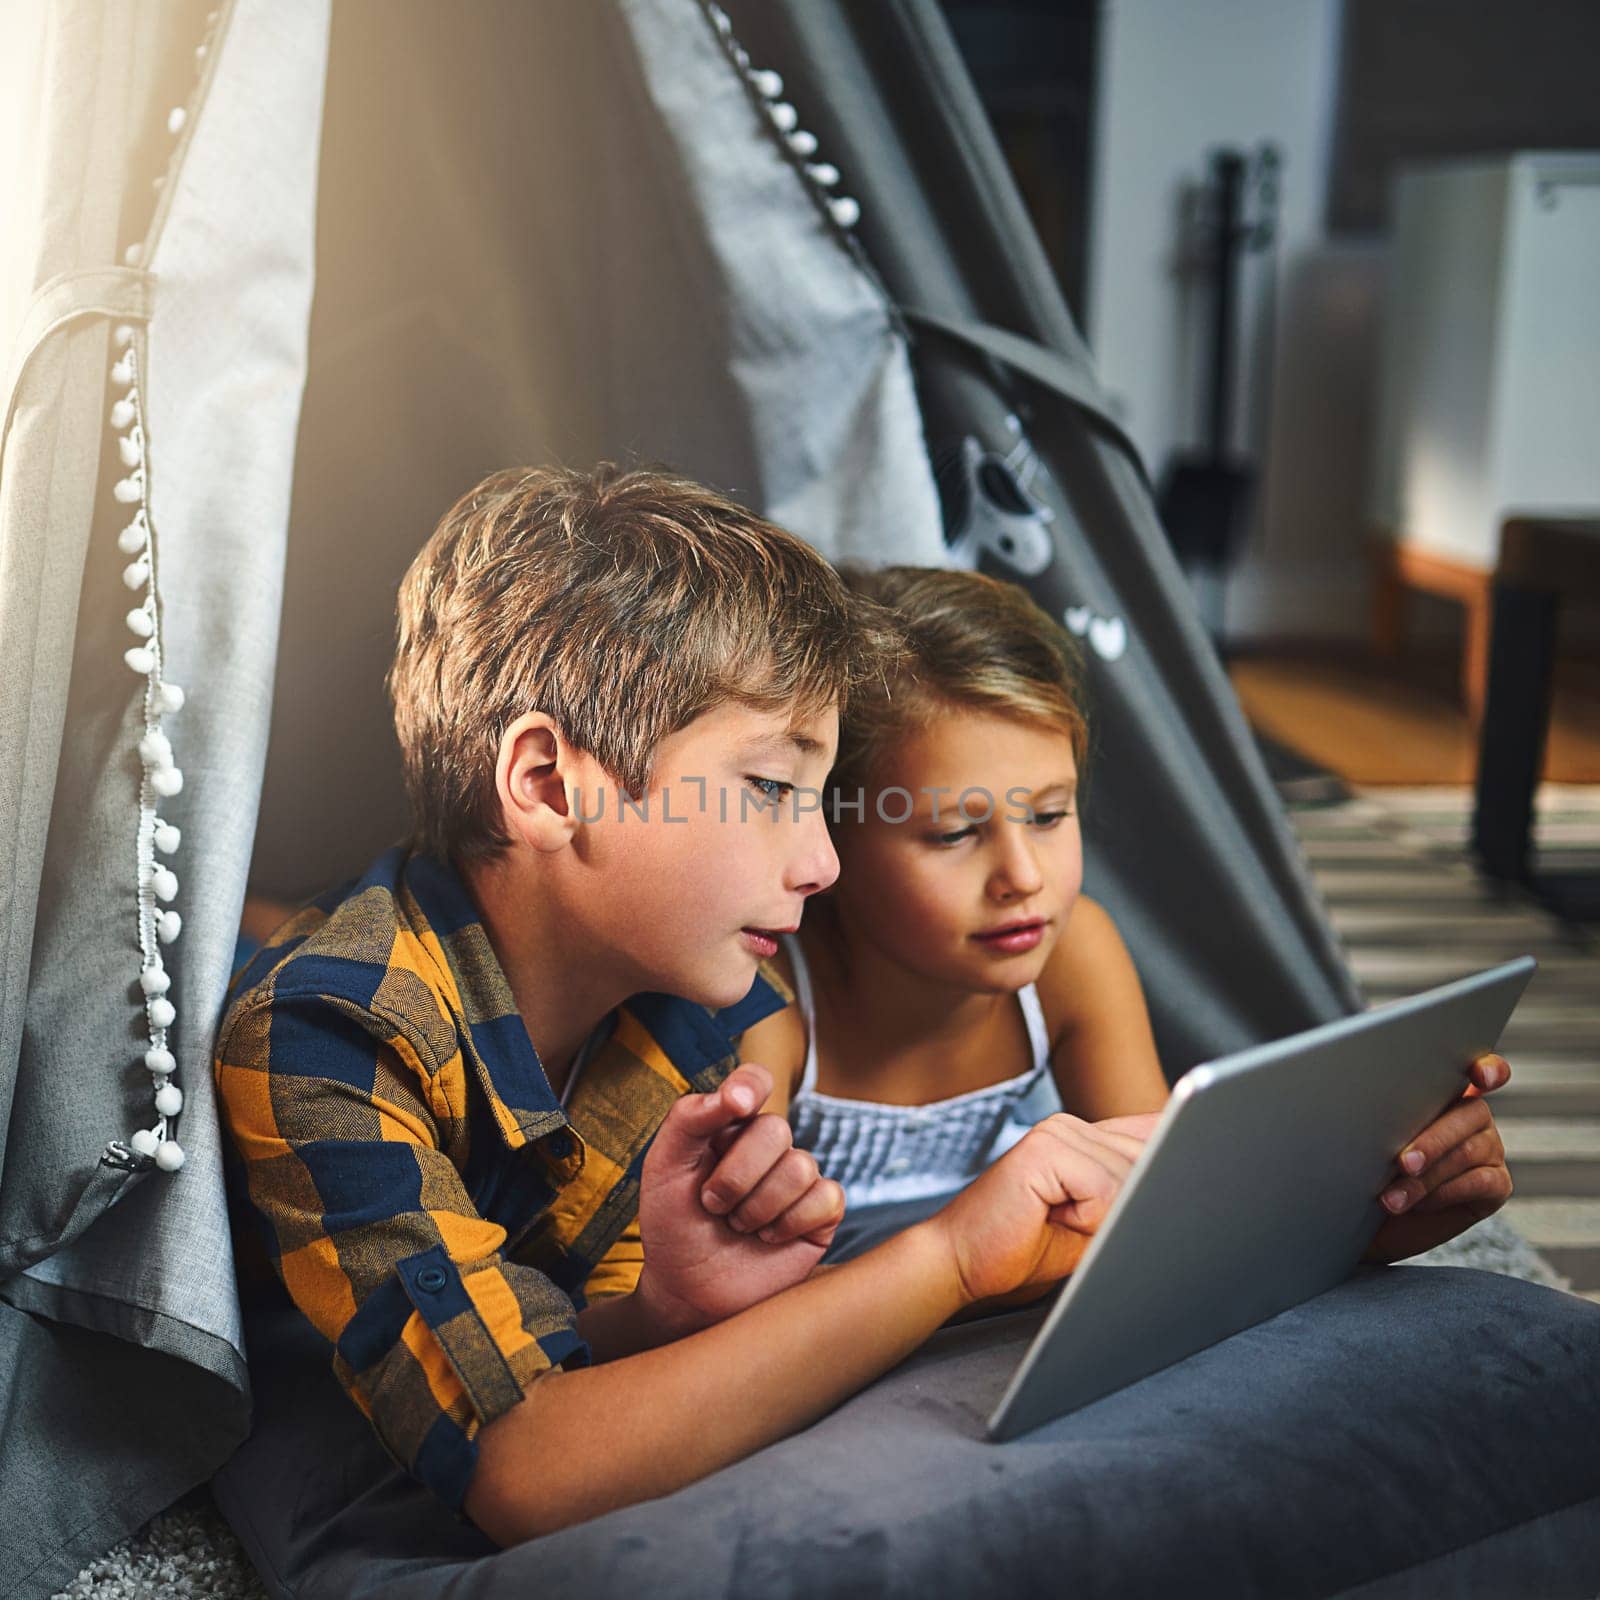 Siblings having fun on the wifi. an adorable little boy and girl using a tablet together while chilling in a homemade tent in the living room at home